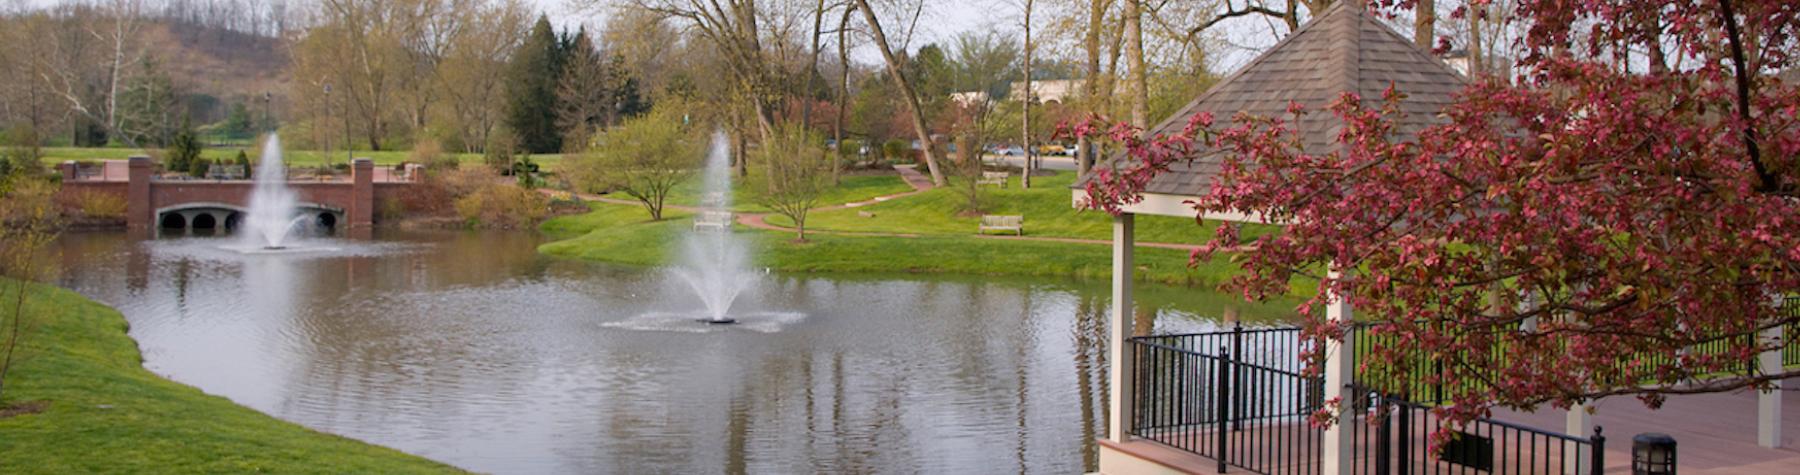 Overlooking fountains in a lake and a gazebo in the distance surrounded by foliage.